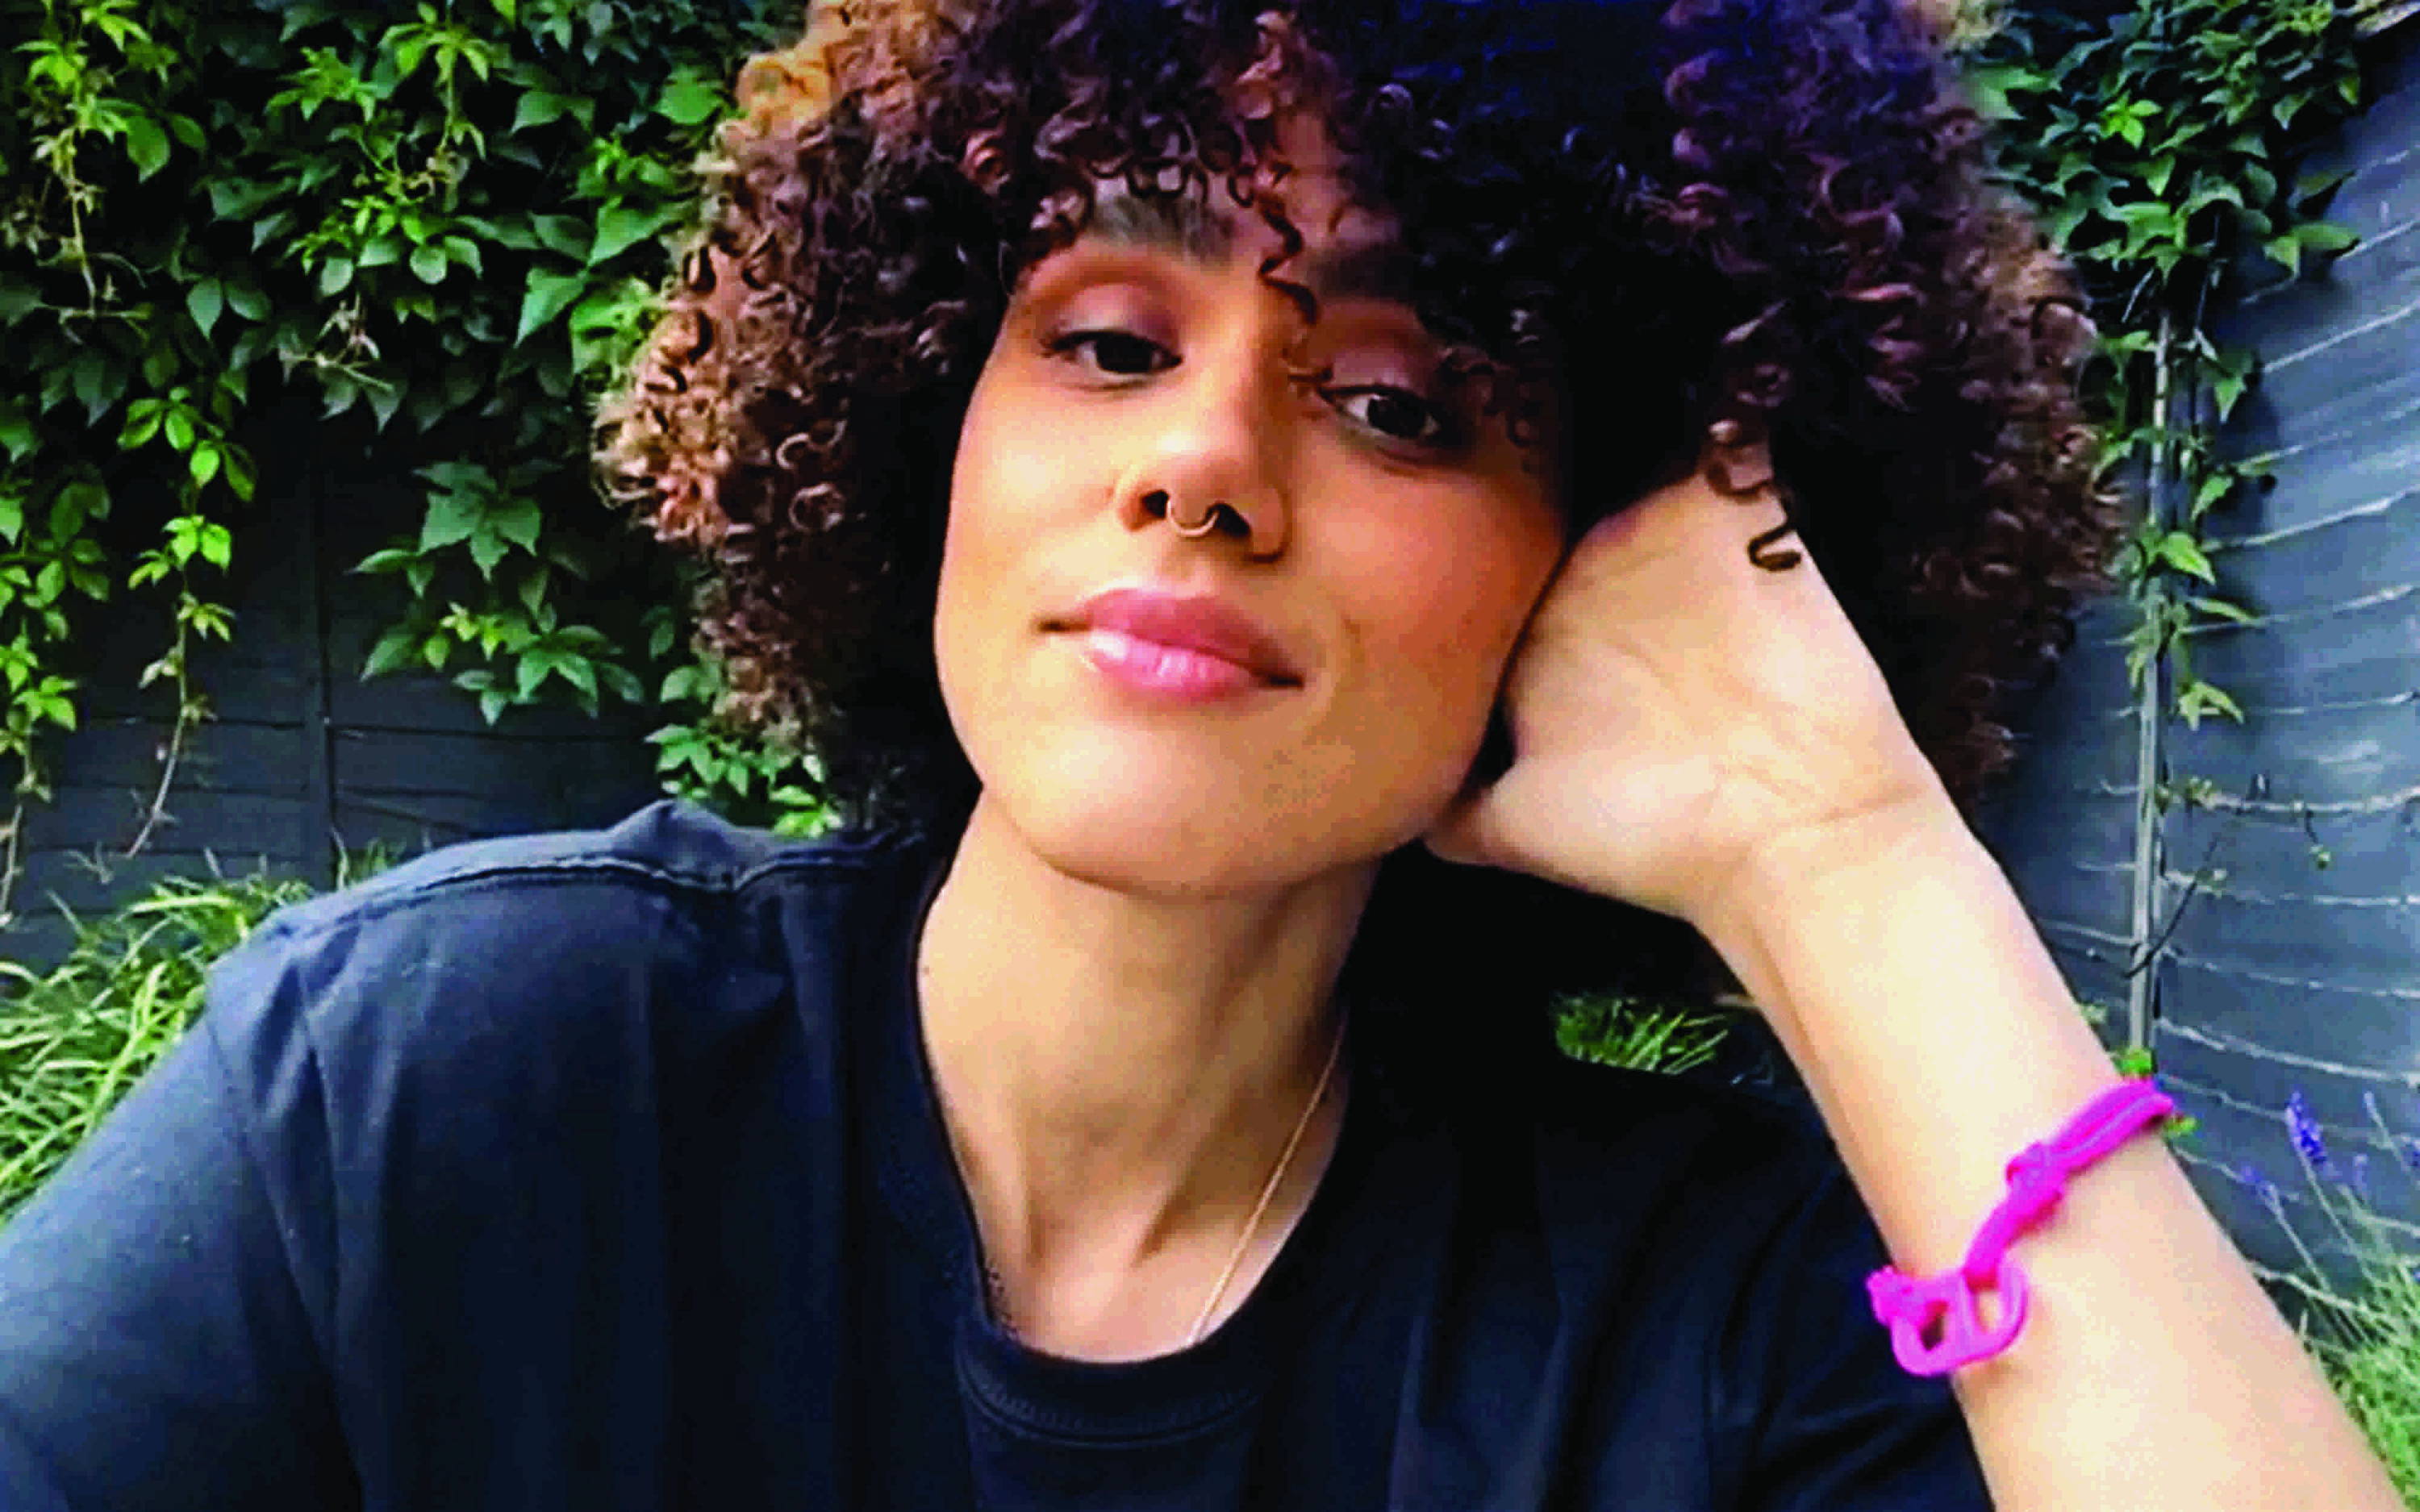 The actress Nathalie Emmanuel wears a Goal 10: Reduced Inequalities #TOGETHERBAND